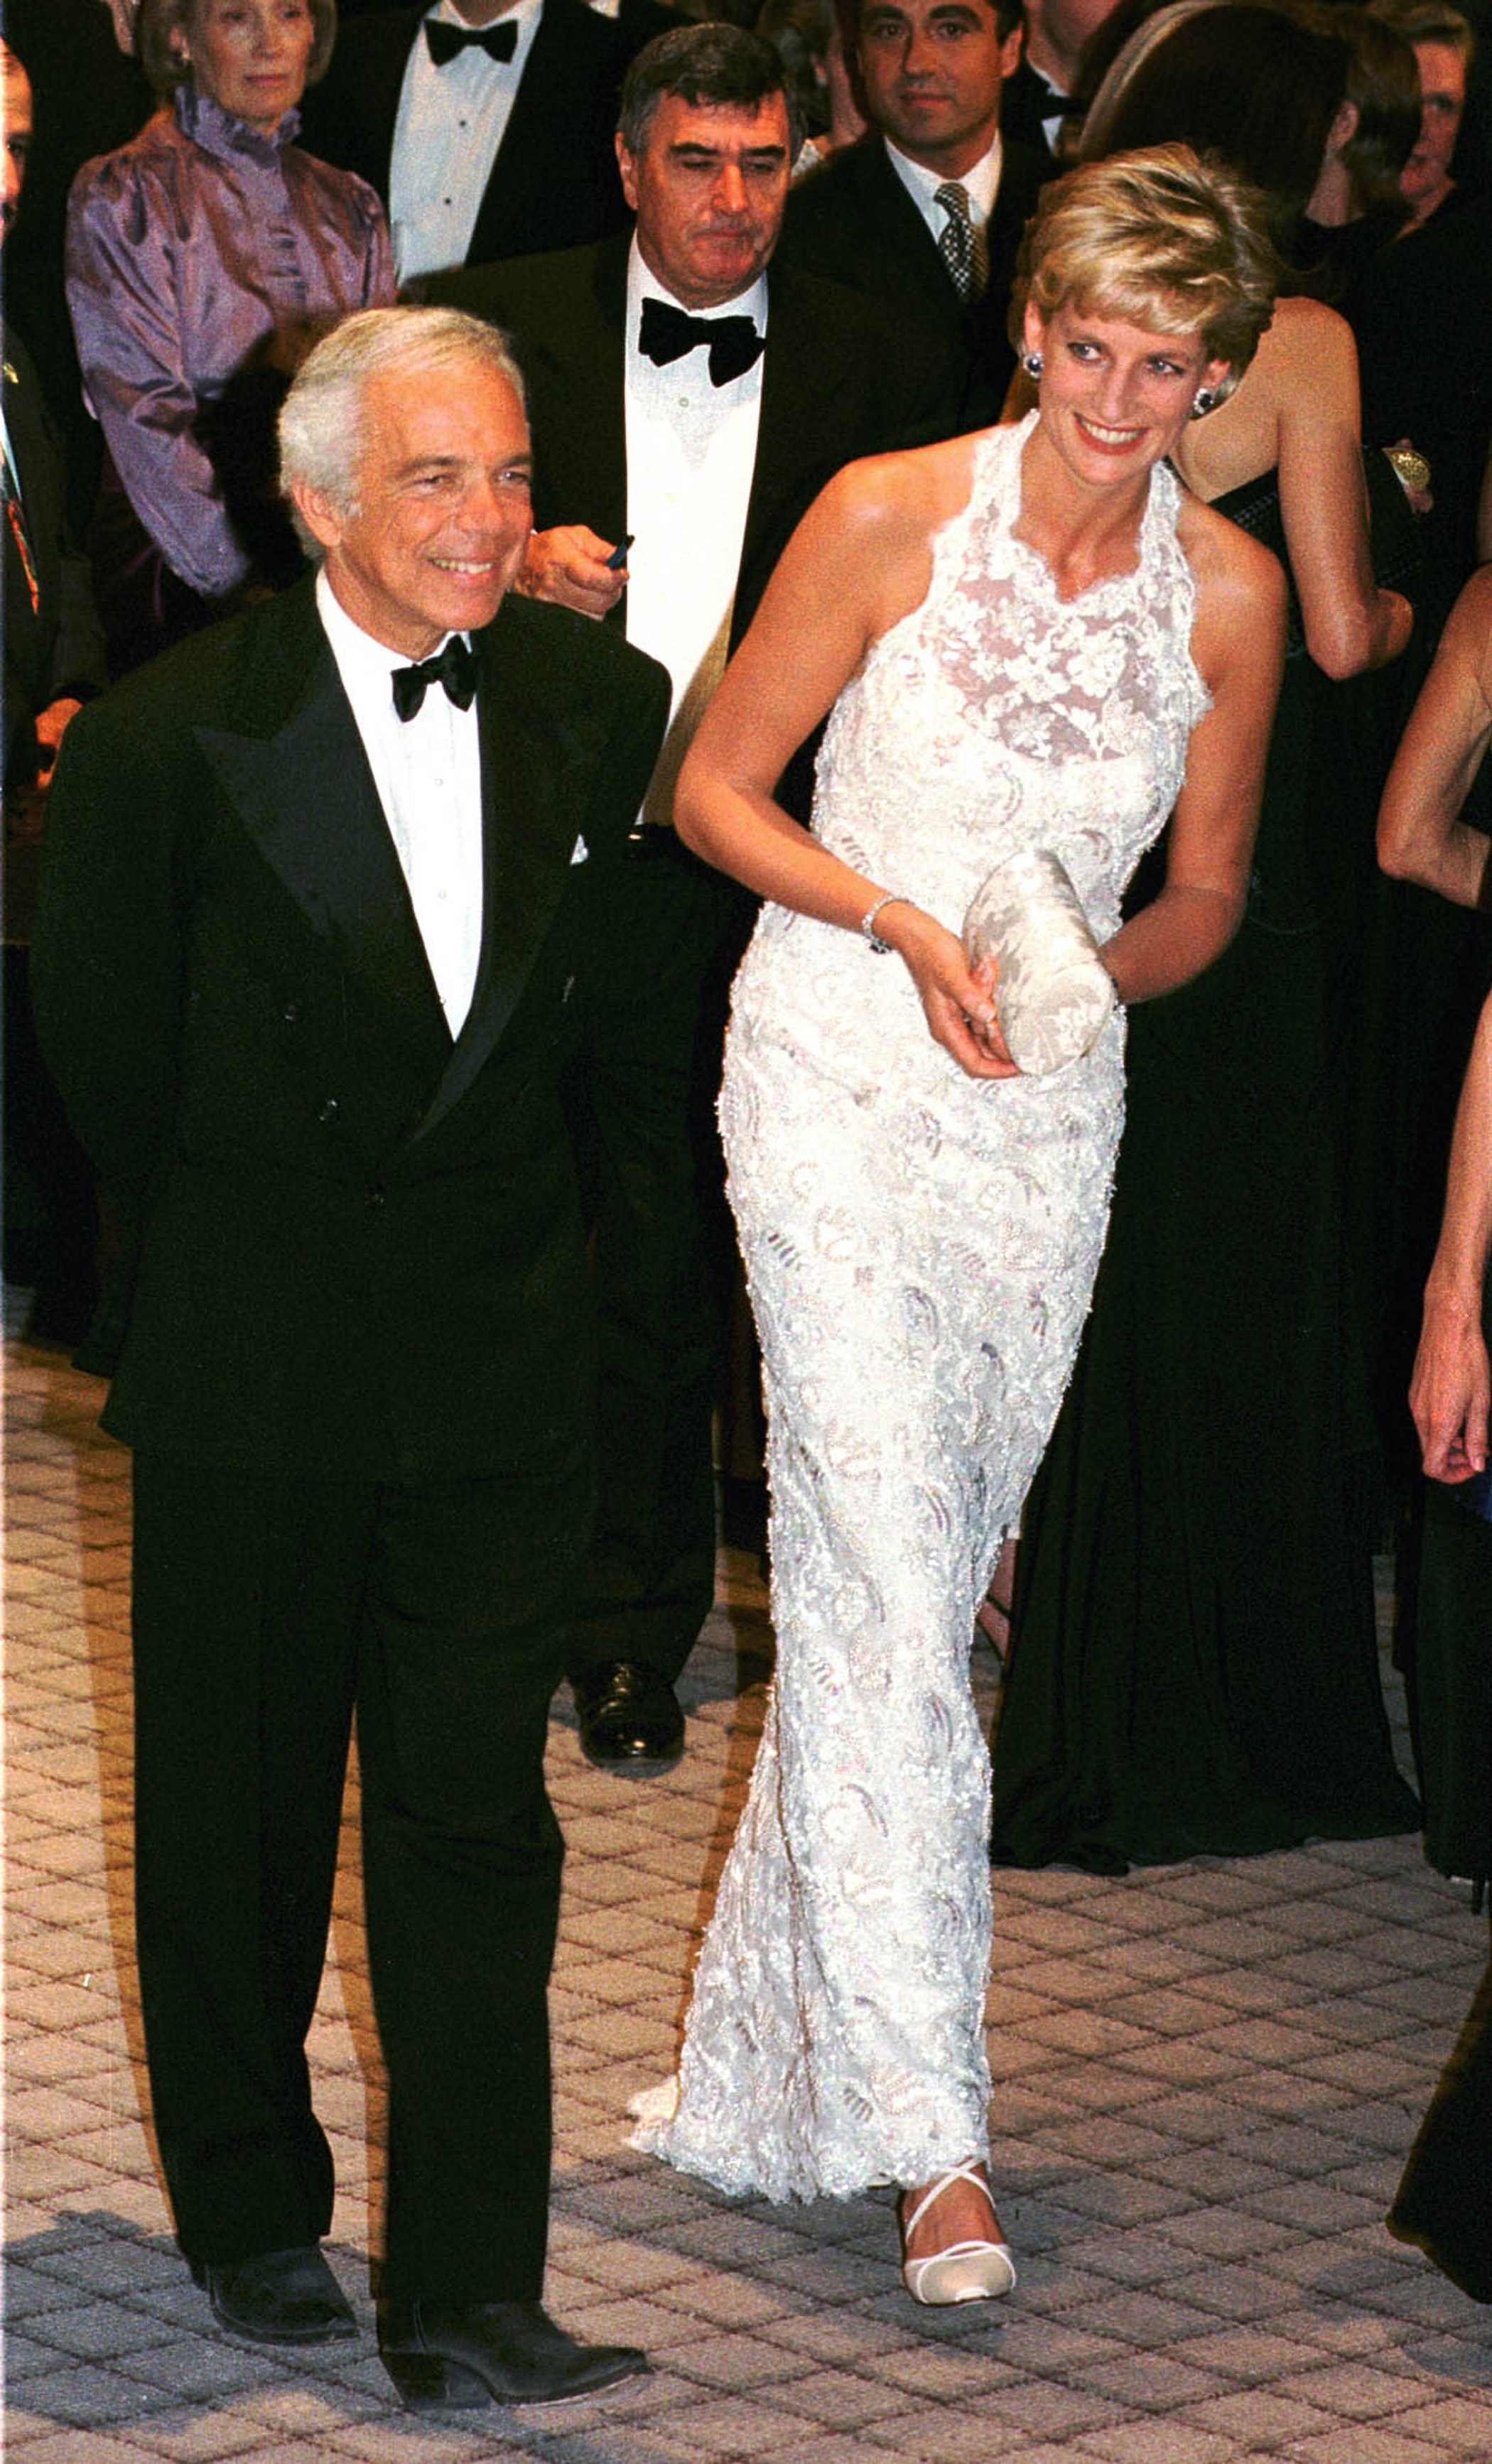 Princess Diana is escorted by fashion designer Ralph Lauren during an event at the National Building Museum on Sept. 24, 1996 in Washington.